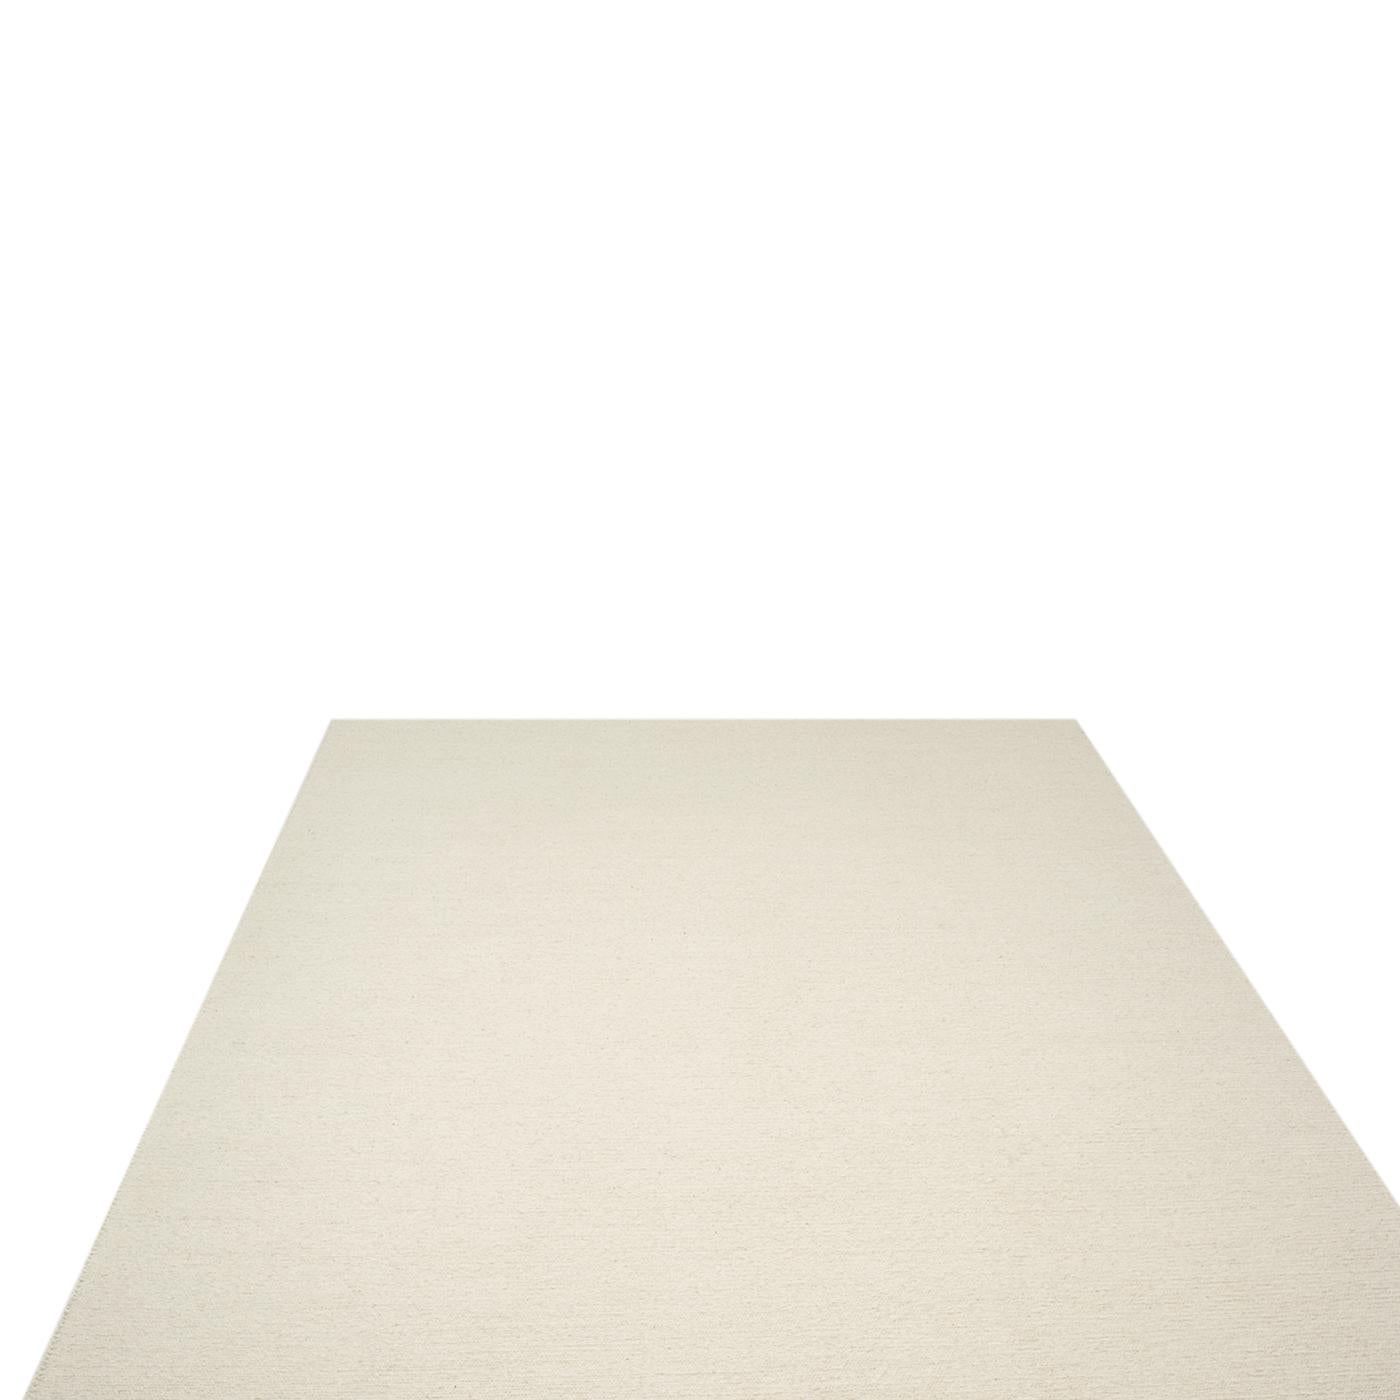 Nepalese Chunky Sumac Plain Cream Flatweave Rug by Knots Rugs For Sale